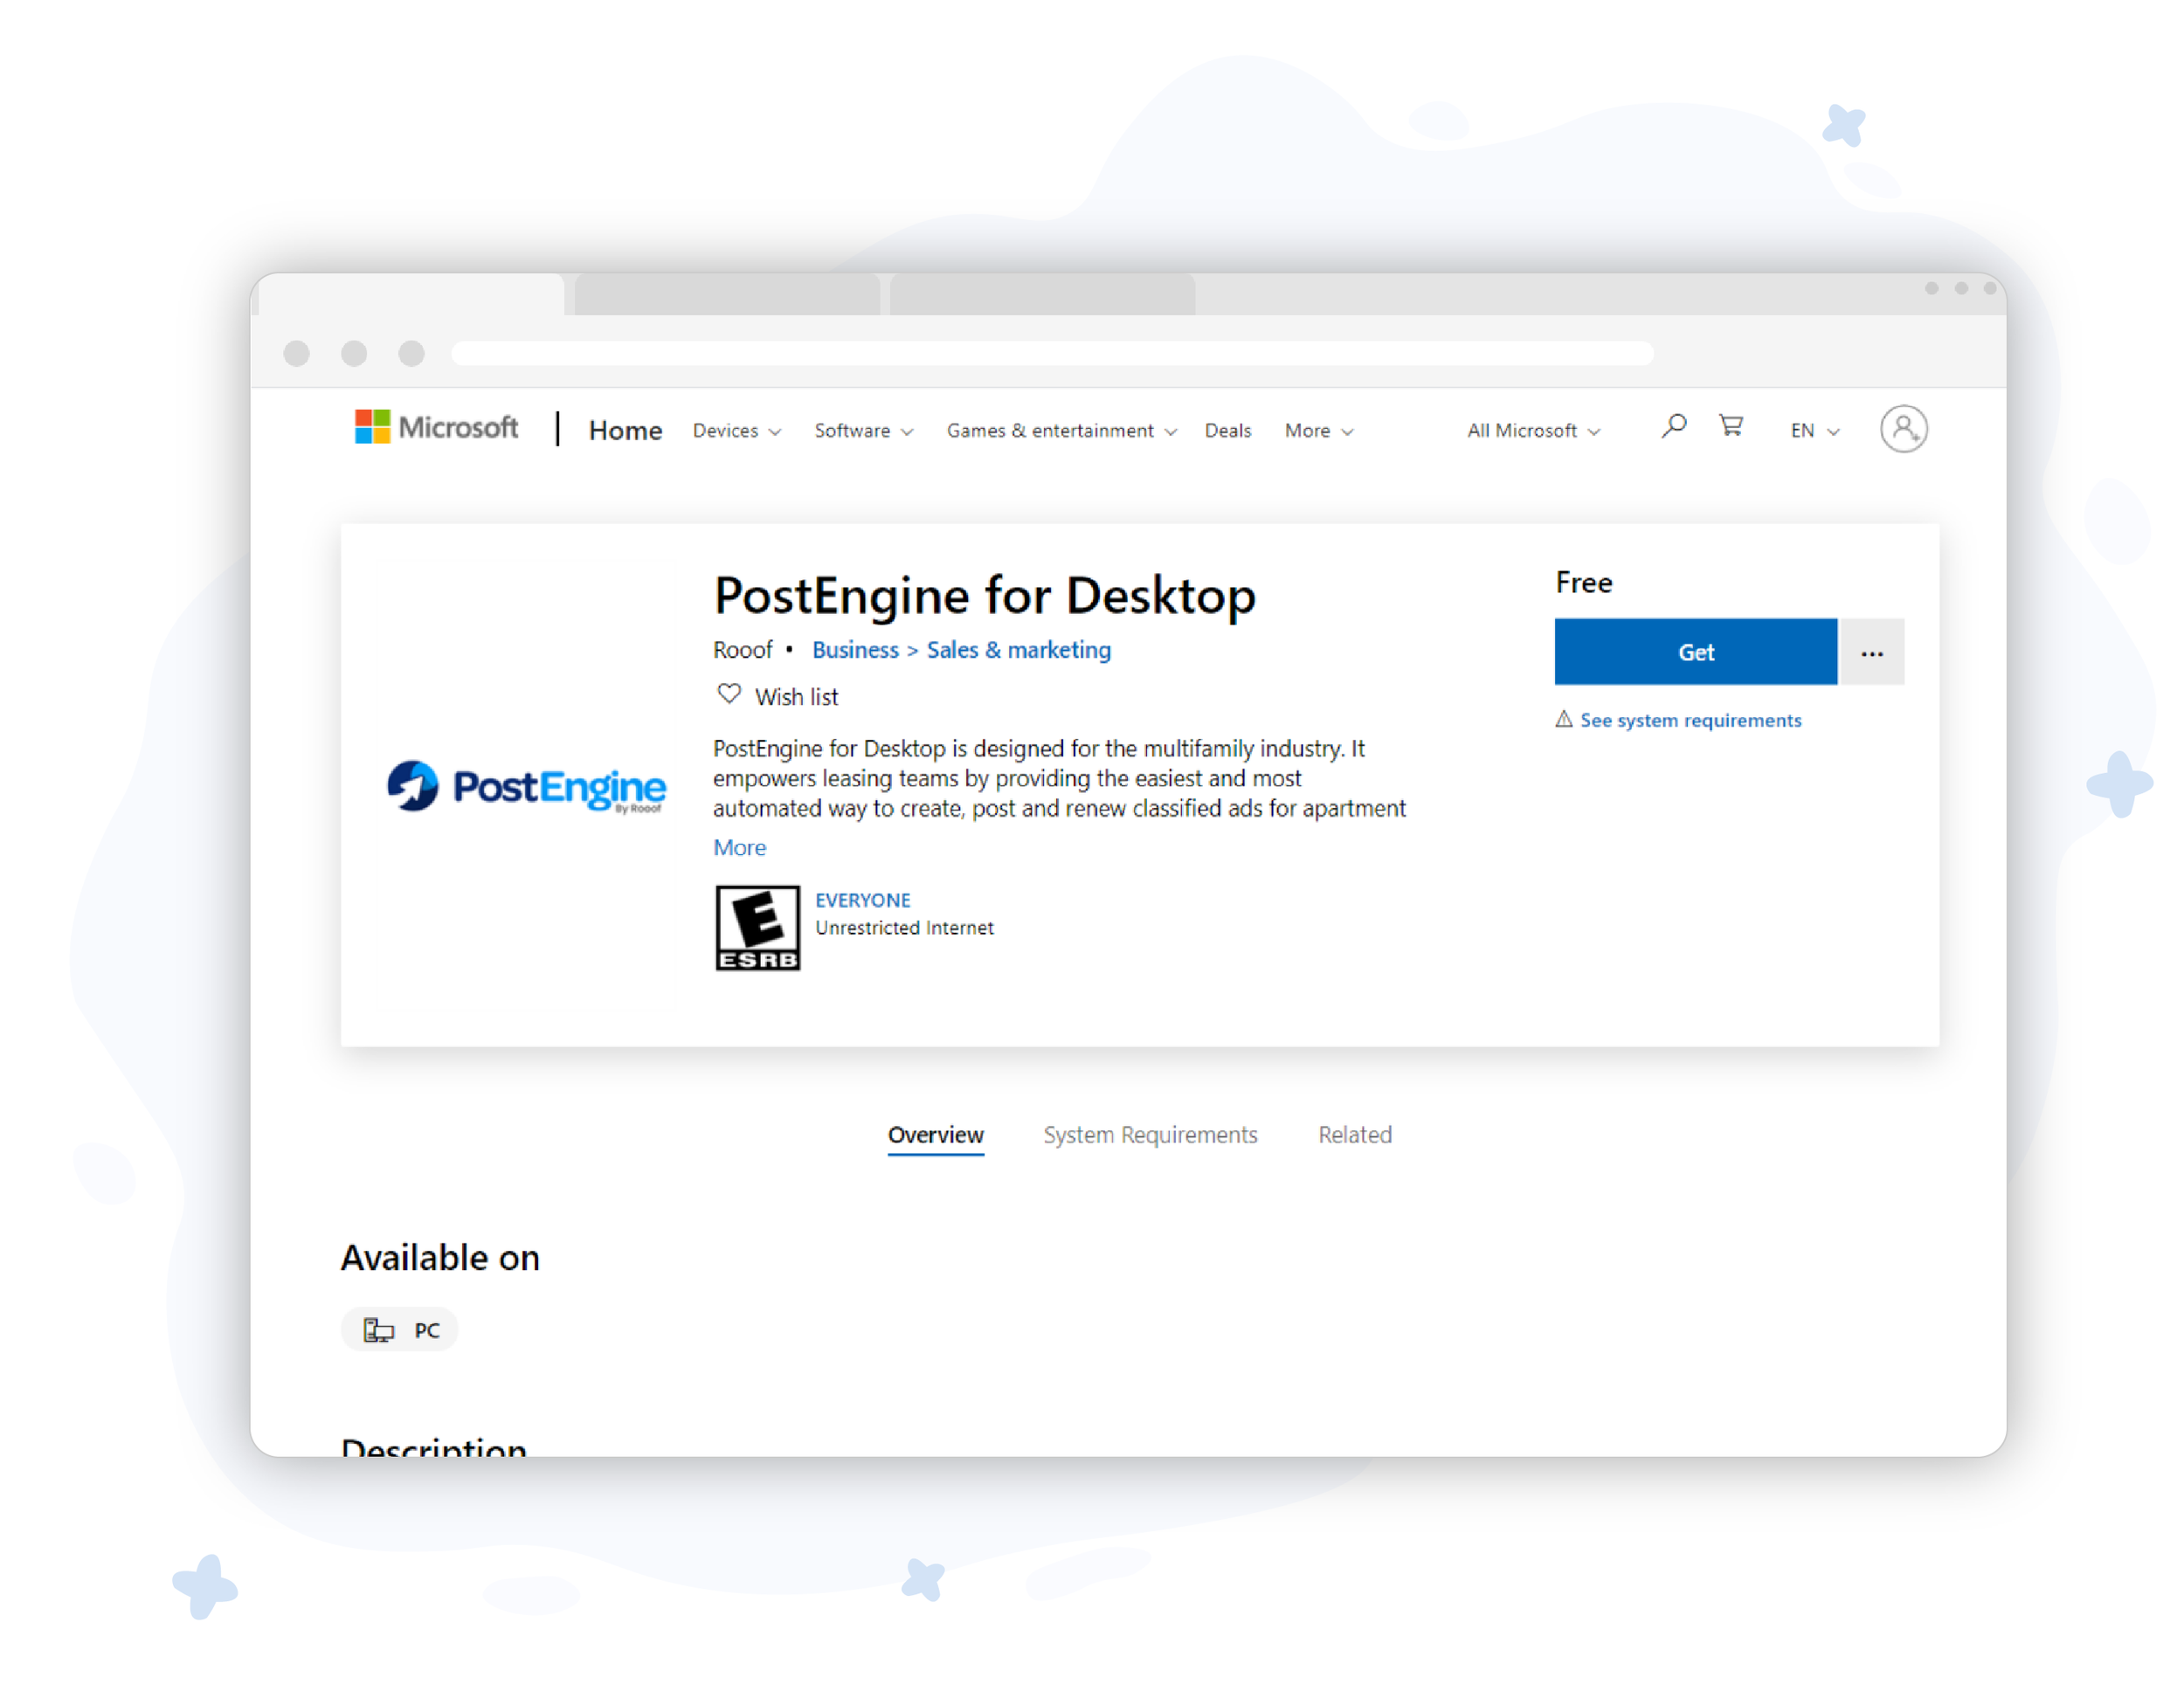  Download PostEngine software from the Microsoft Store. 